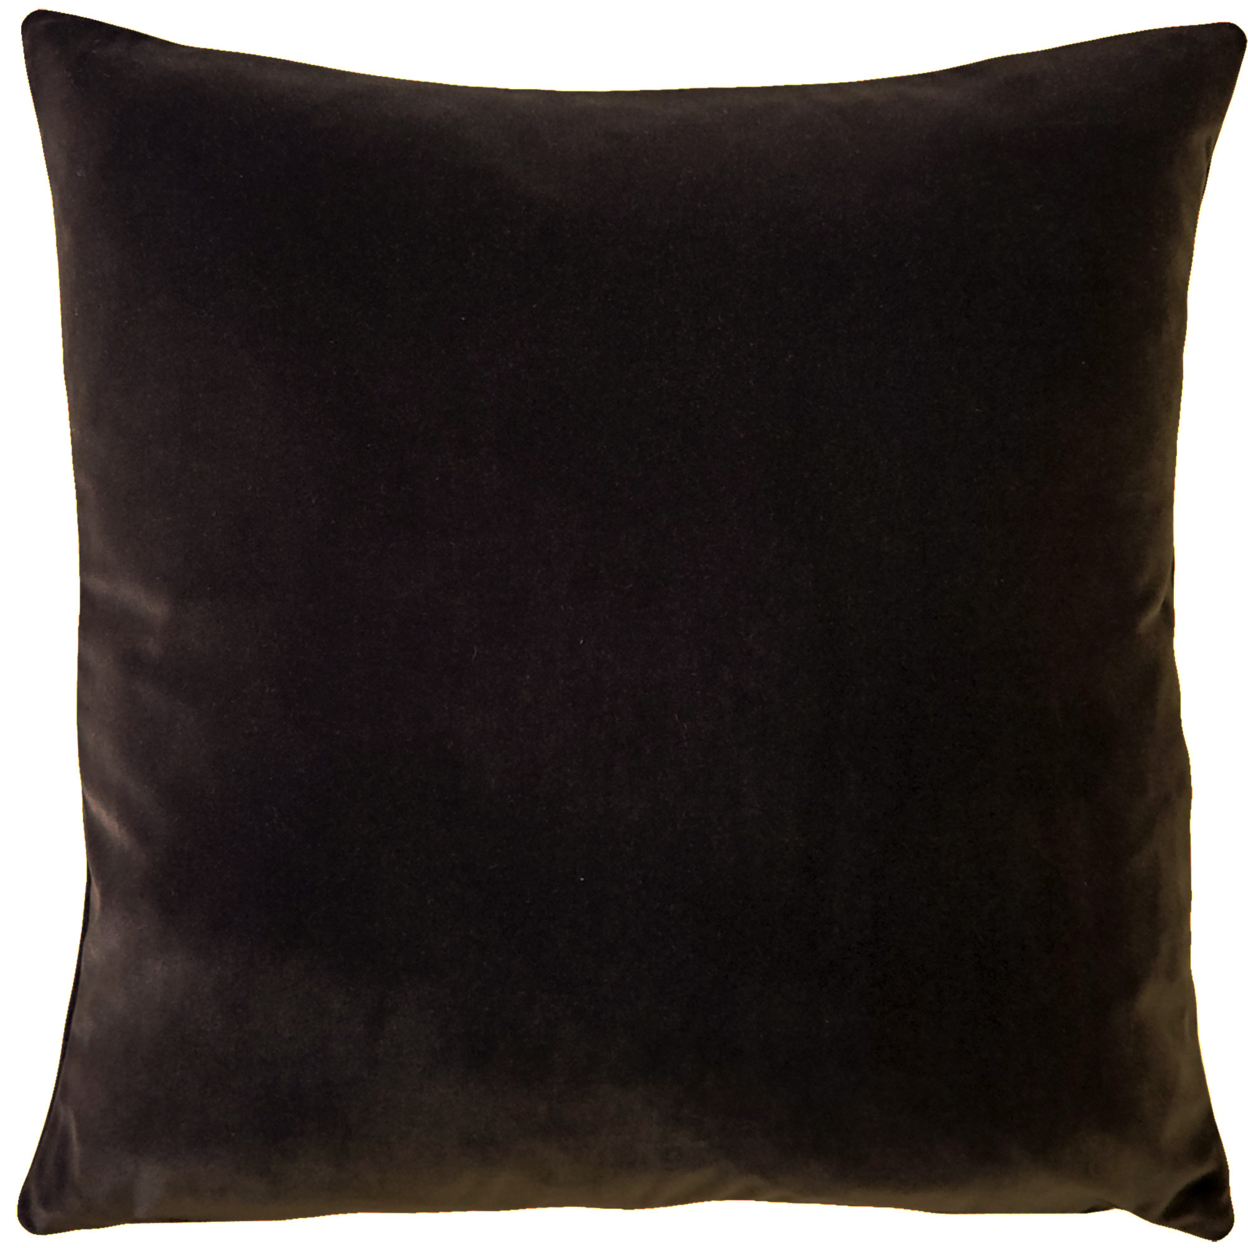 Castello Velvet Throw Pillows, Complete Pillow With Polyfill Pillow Insert (18 Colors, 3 Sizes) - Graphite Gray, 12x20